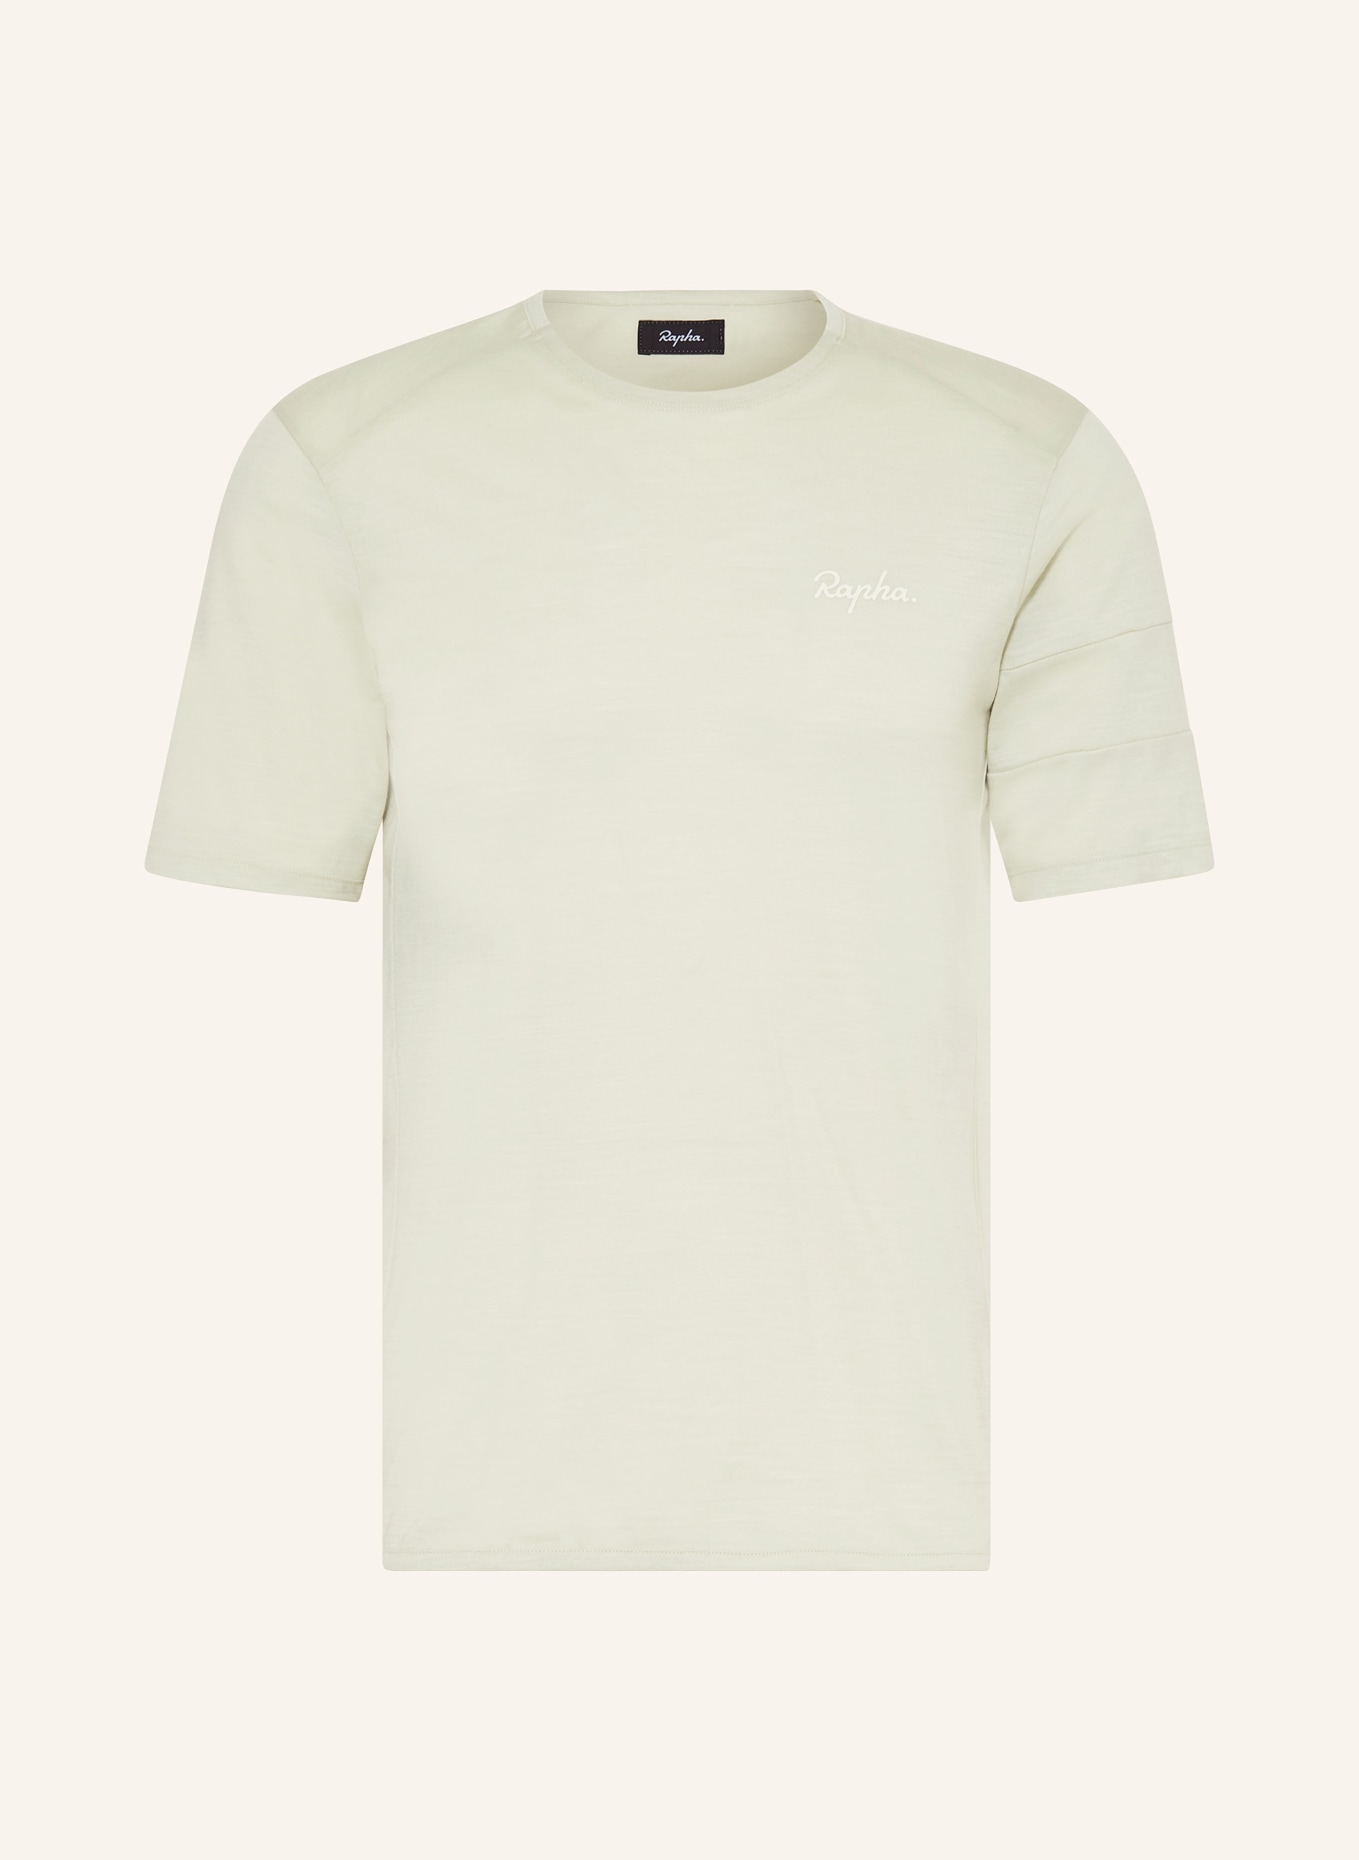 Rapha T-shirt EXPLORE with merino wool, Color: MINT (Image 1)